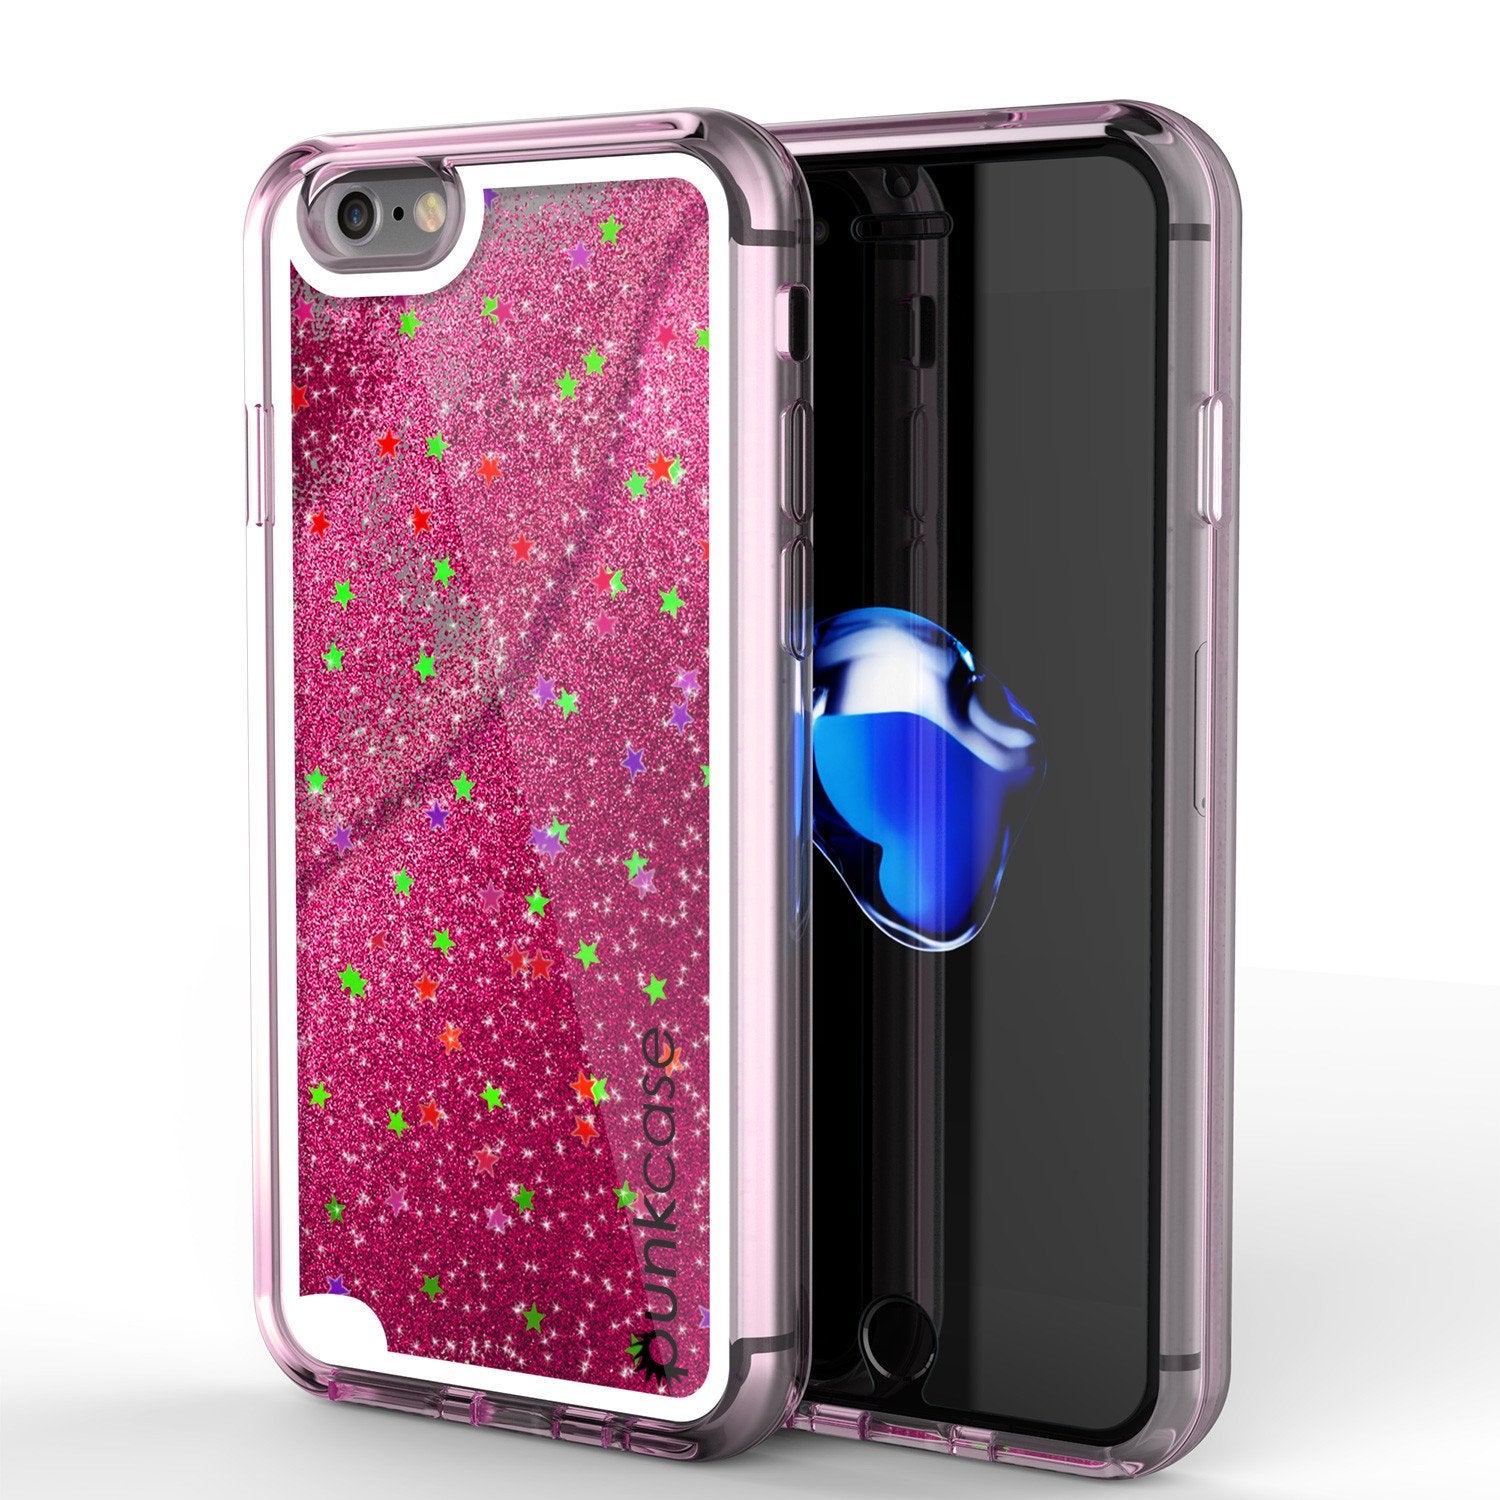 iPhone 7 Case, PunkCase LIQUID Pink Series, Protective Dual Layer Floating Glitter Cover